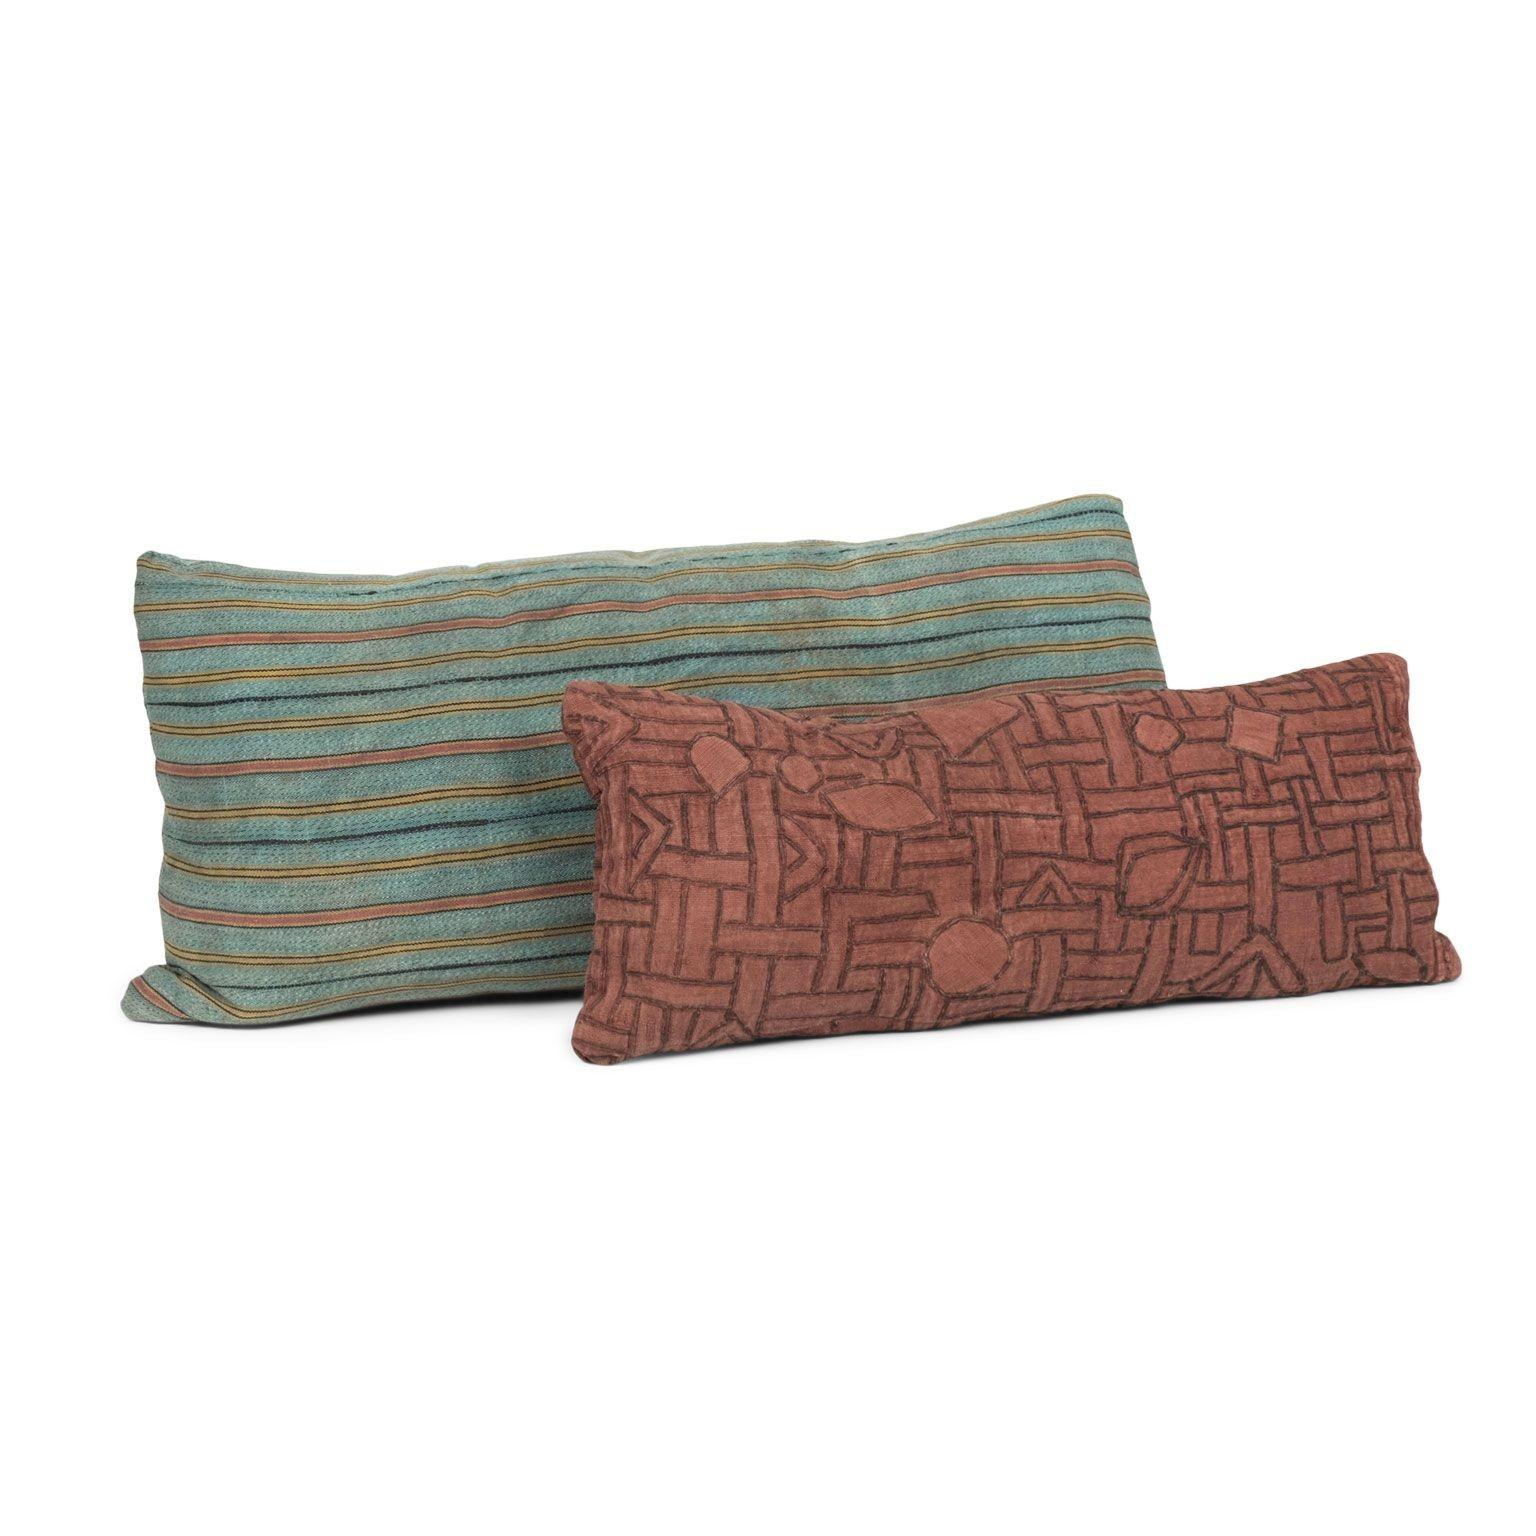 Hand-Woven Large Teal, Gold, Navy and Coral Striped Lumbar Cushion For Sale